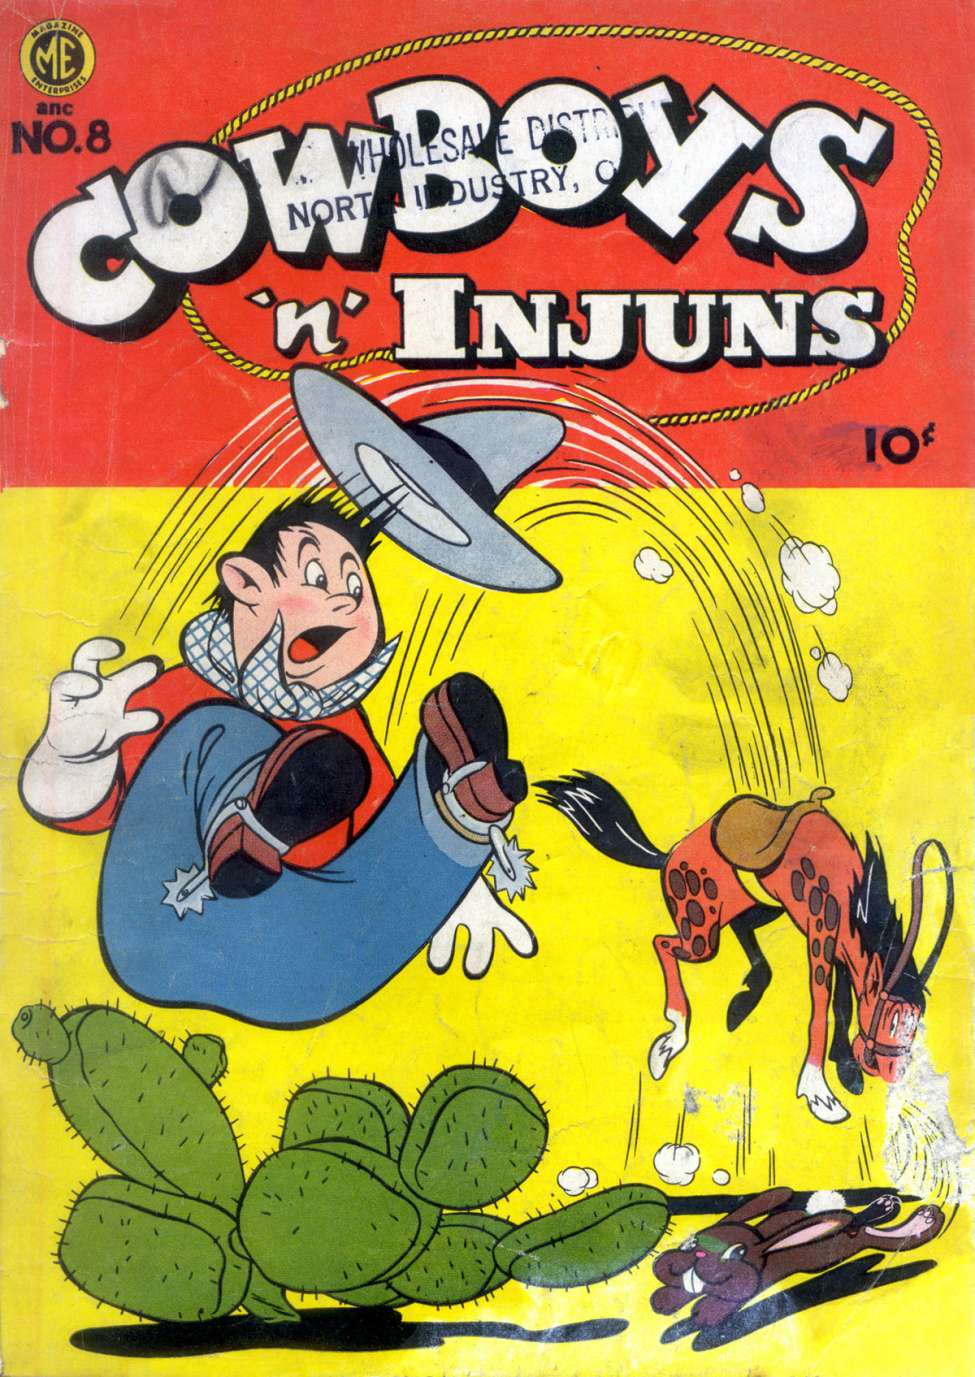 Book Cover For Cowboys 'N' Injuns 8